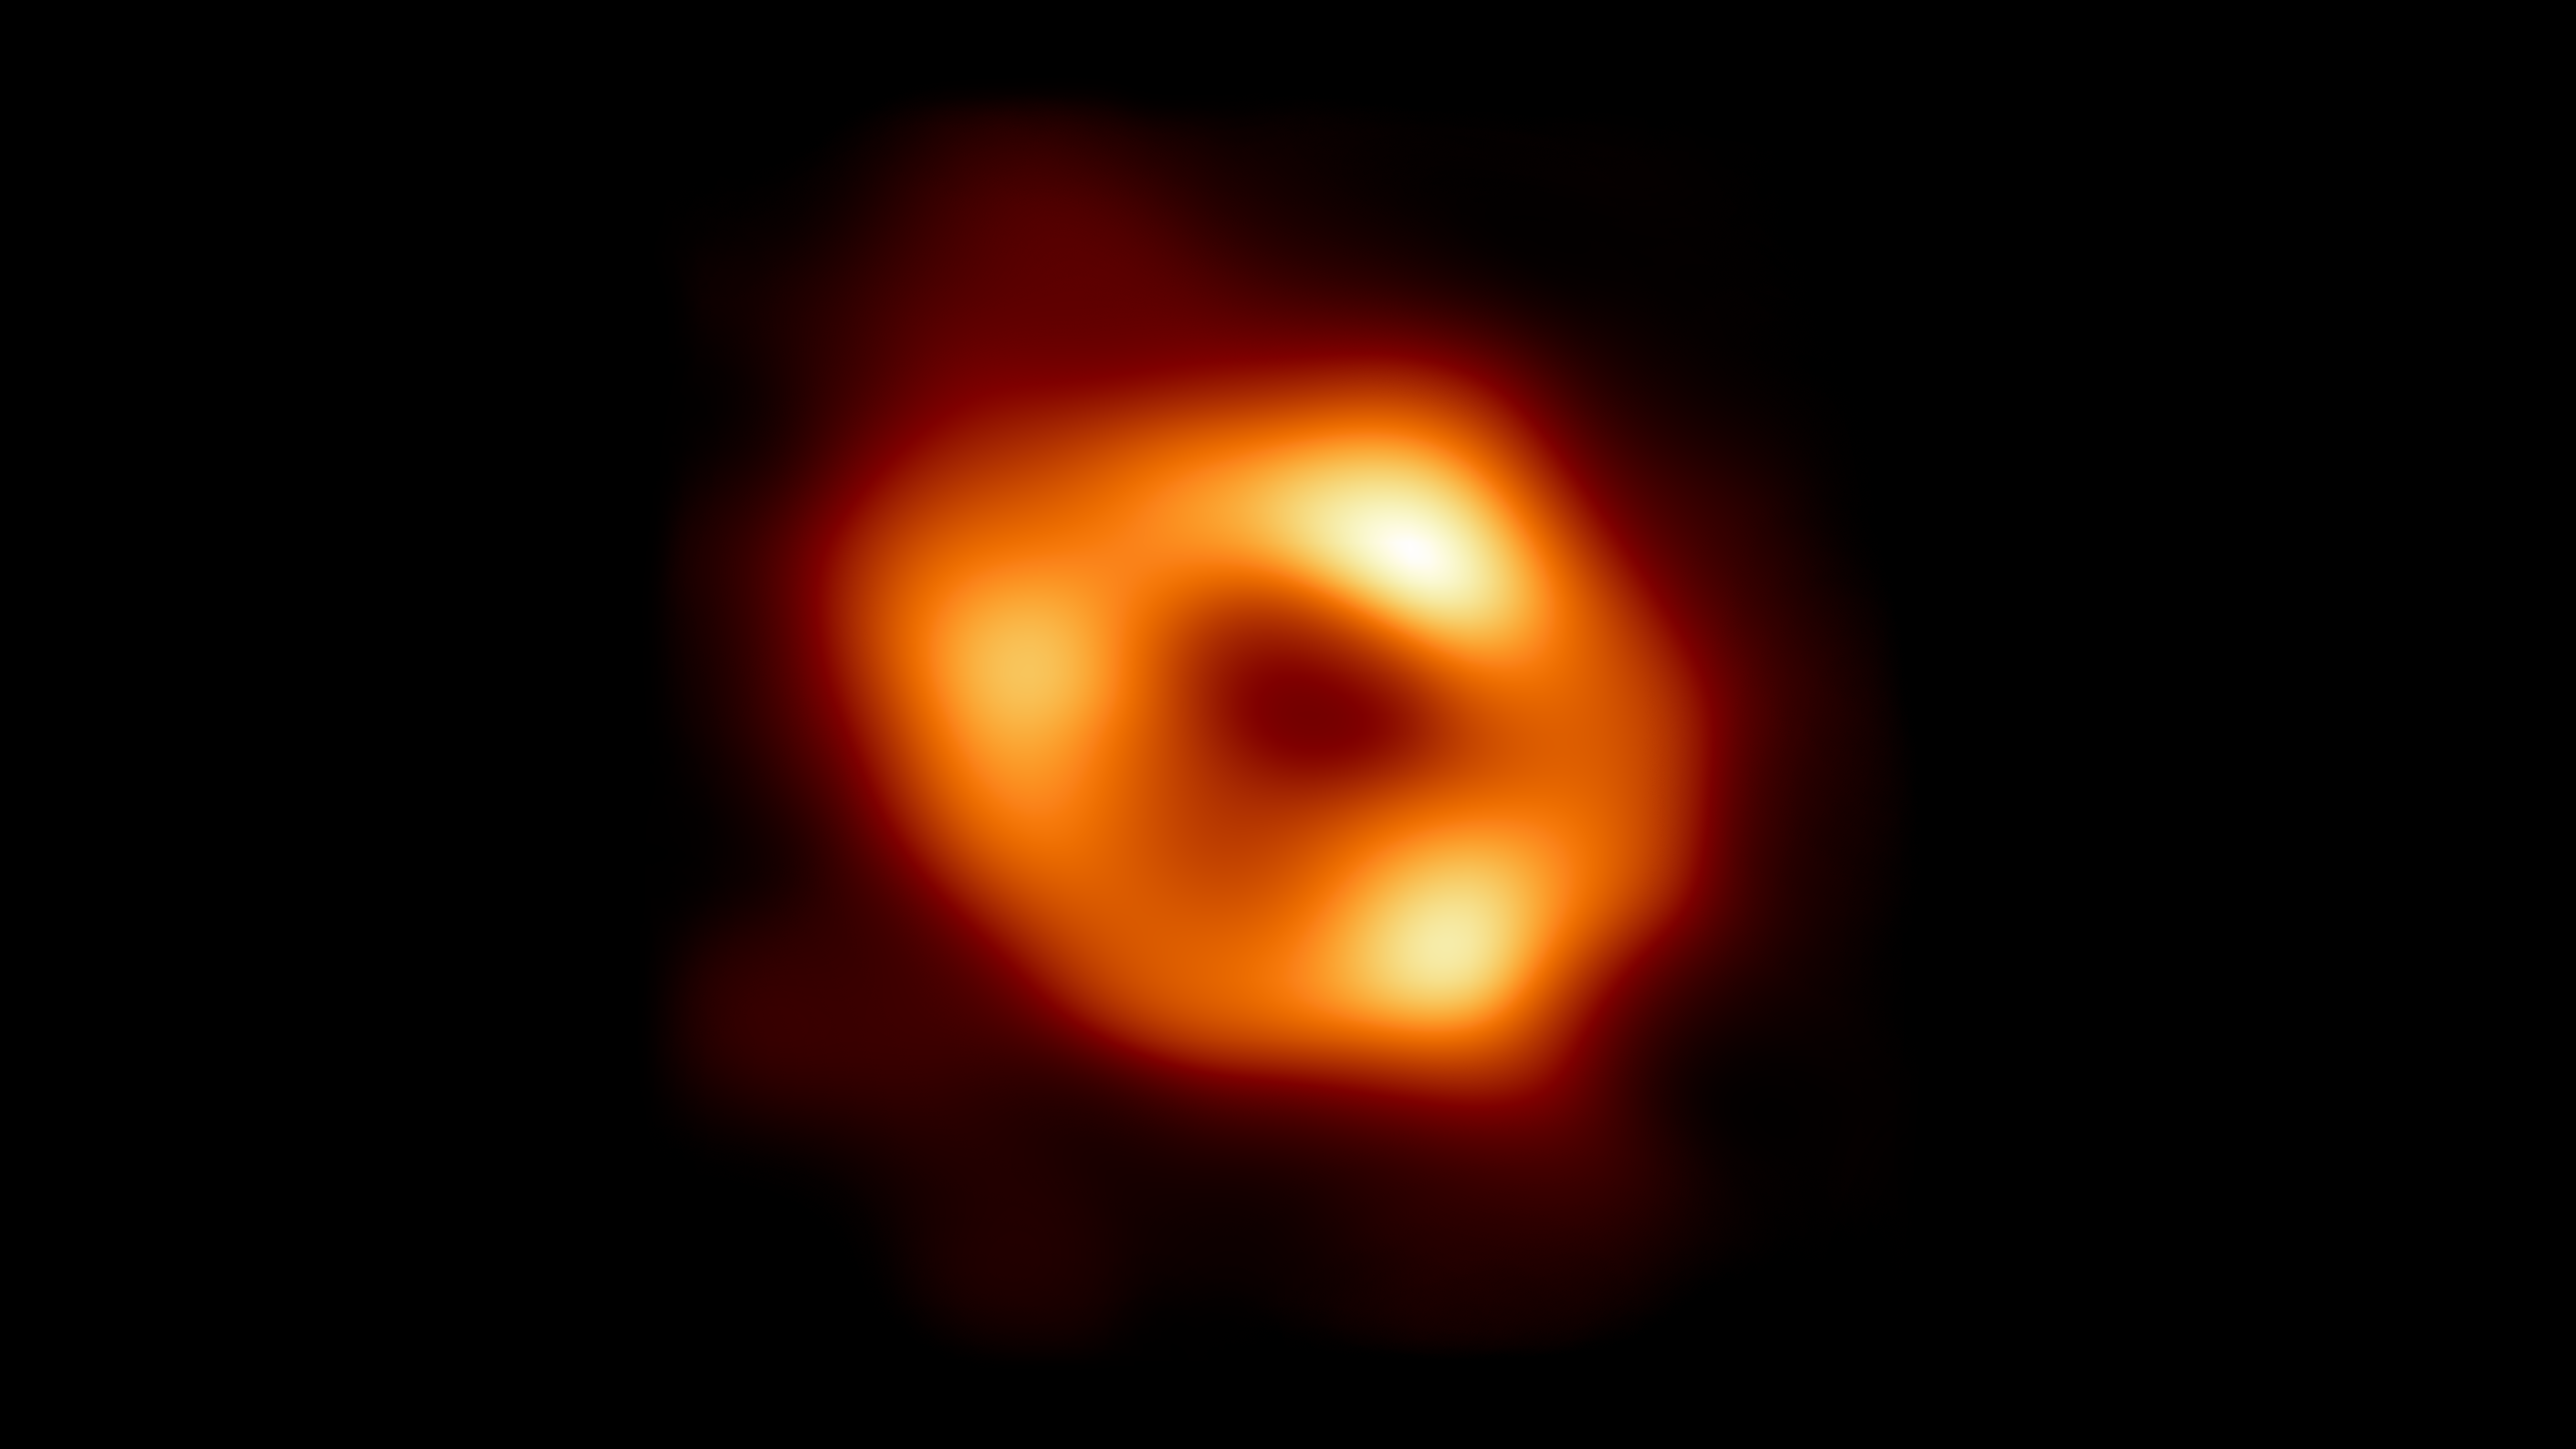 Cover image of Astronomers reveal first image of the black hole at the heart of our galaxy